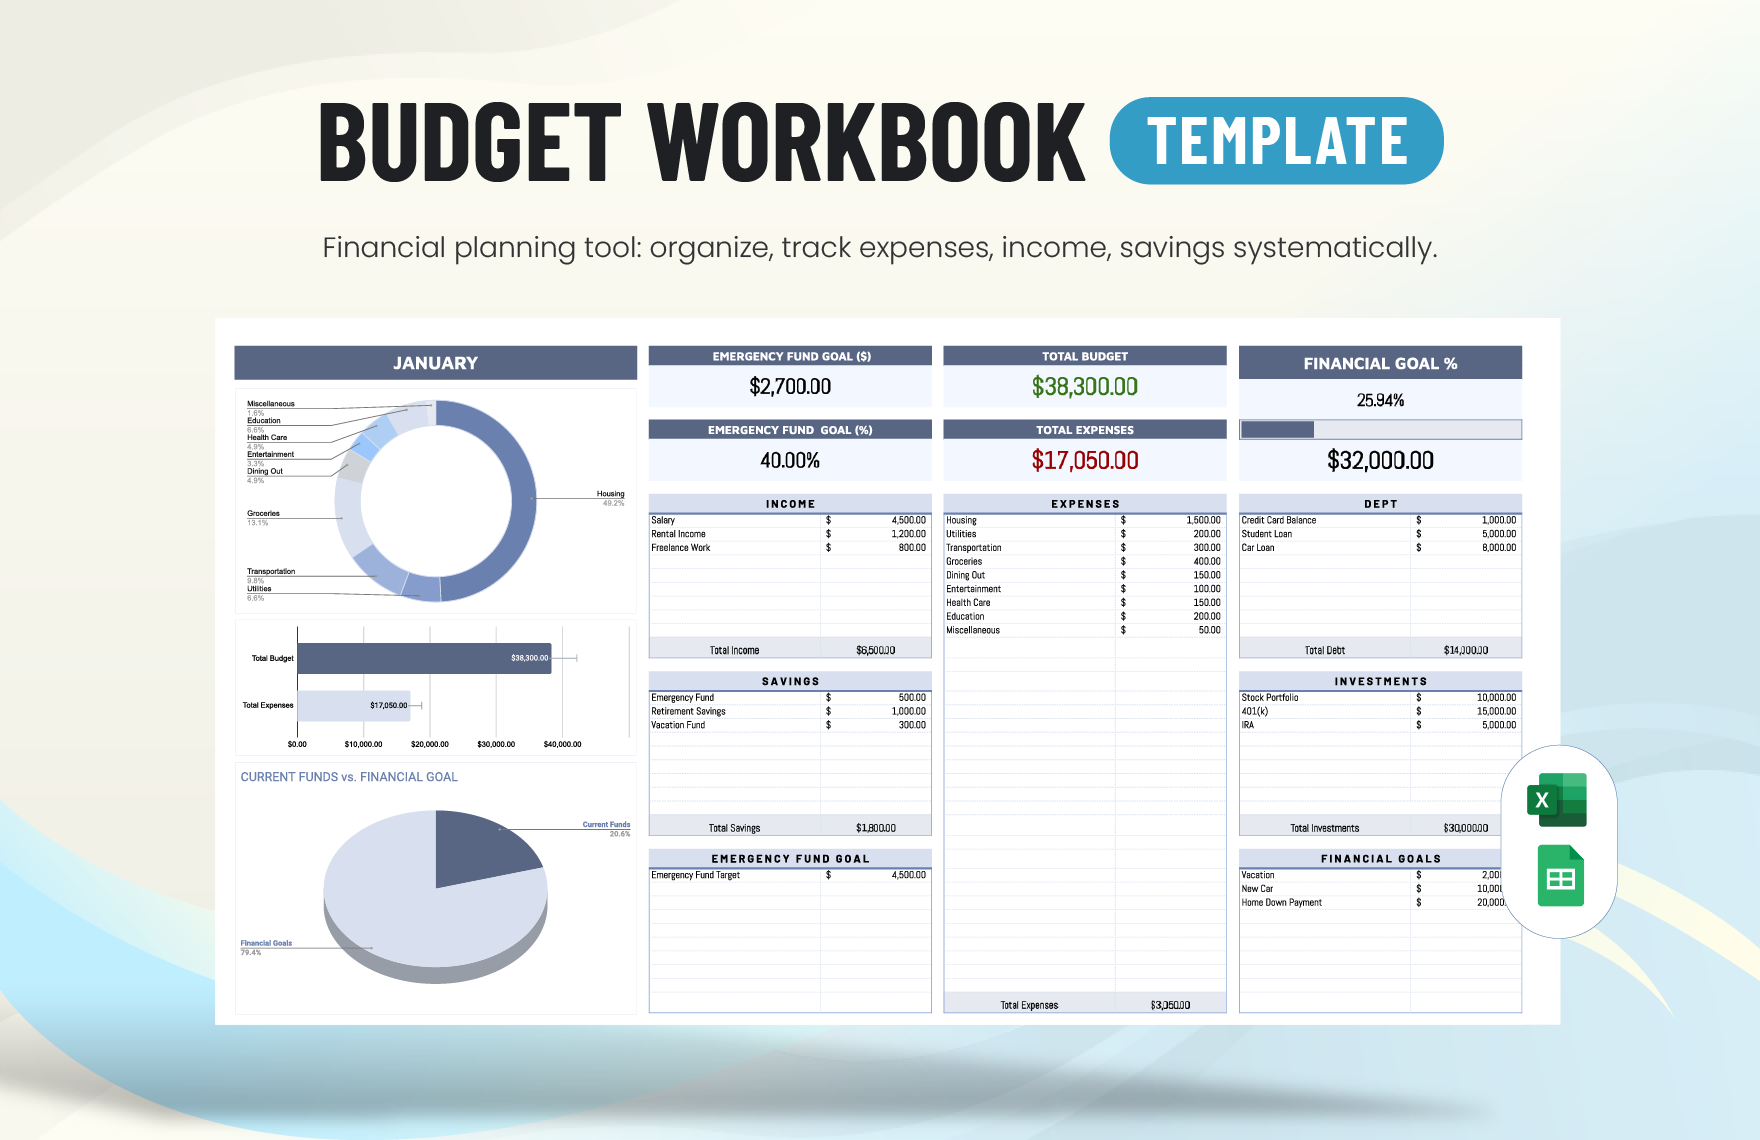 Budget Workbook Template in Excel, Google Sheets